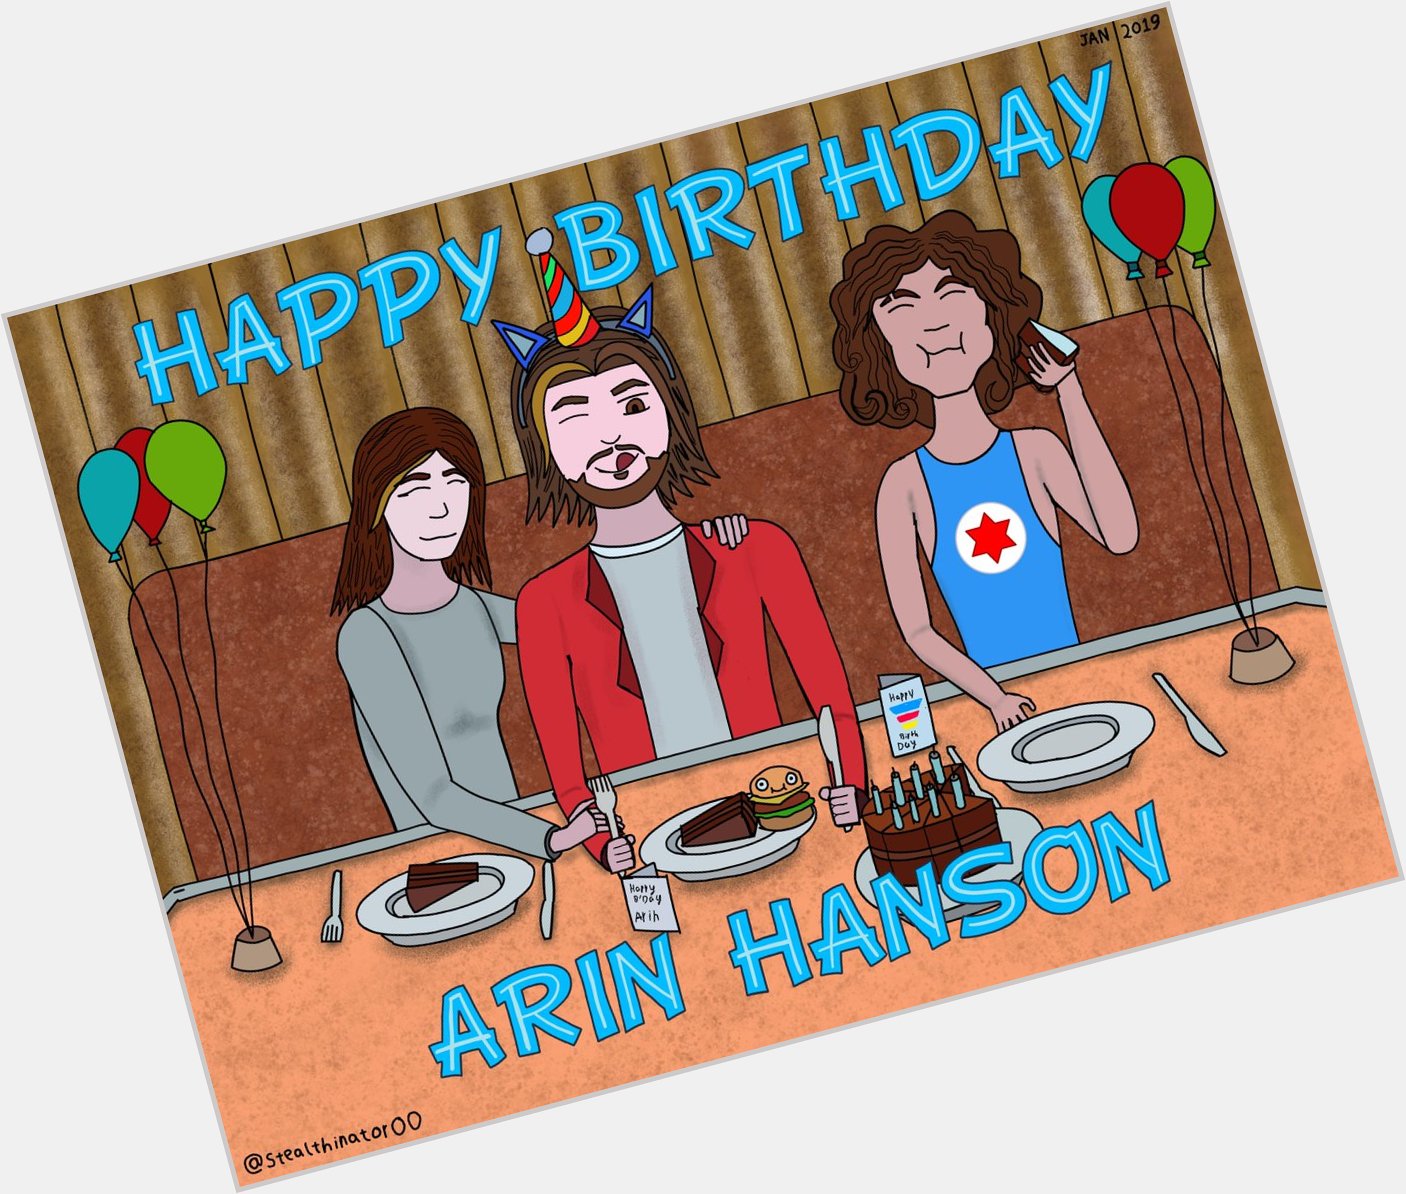   Happy birthday Arin Hanson. Have a fun time at your Birthday party. 